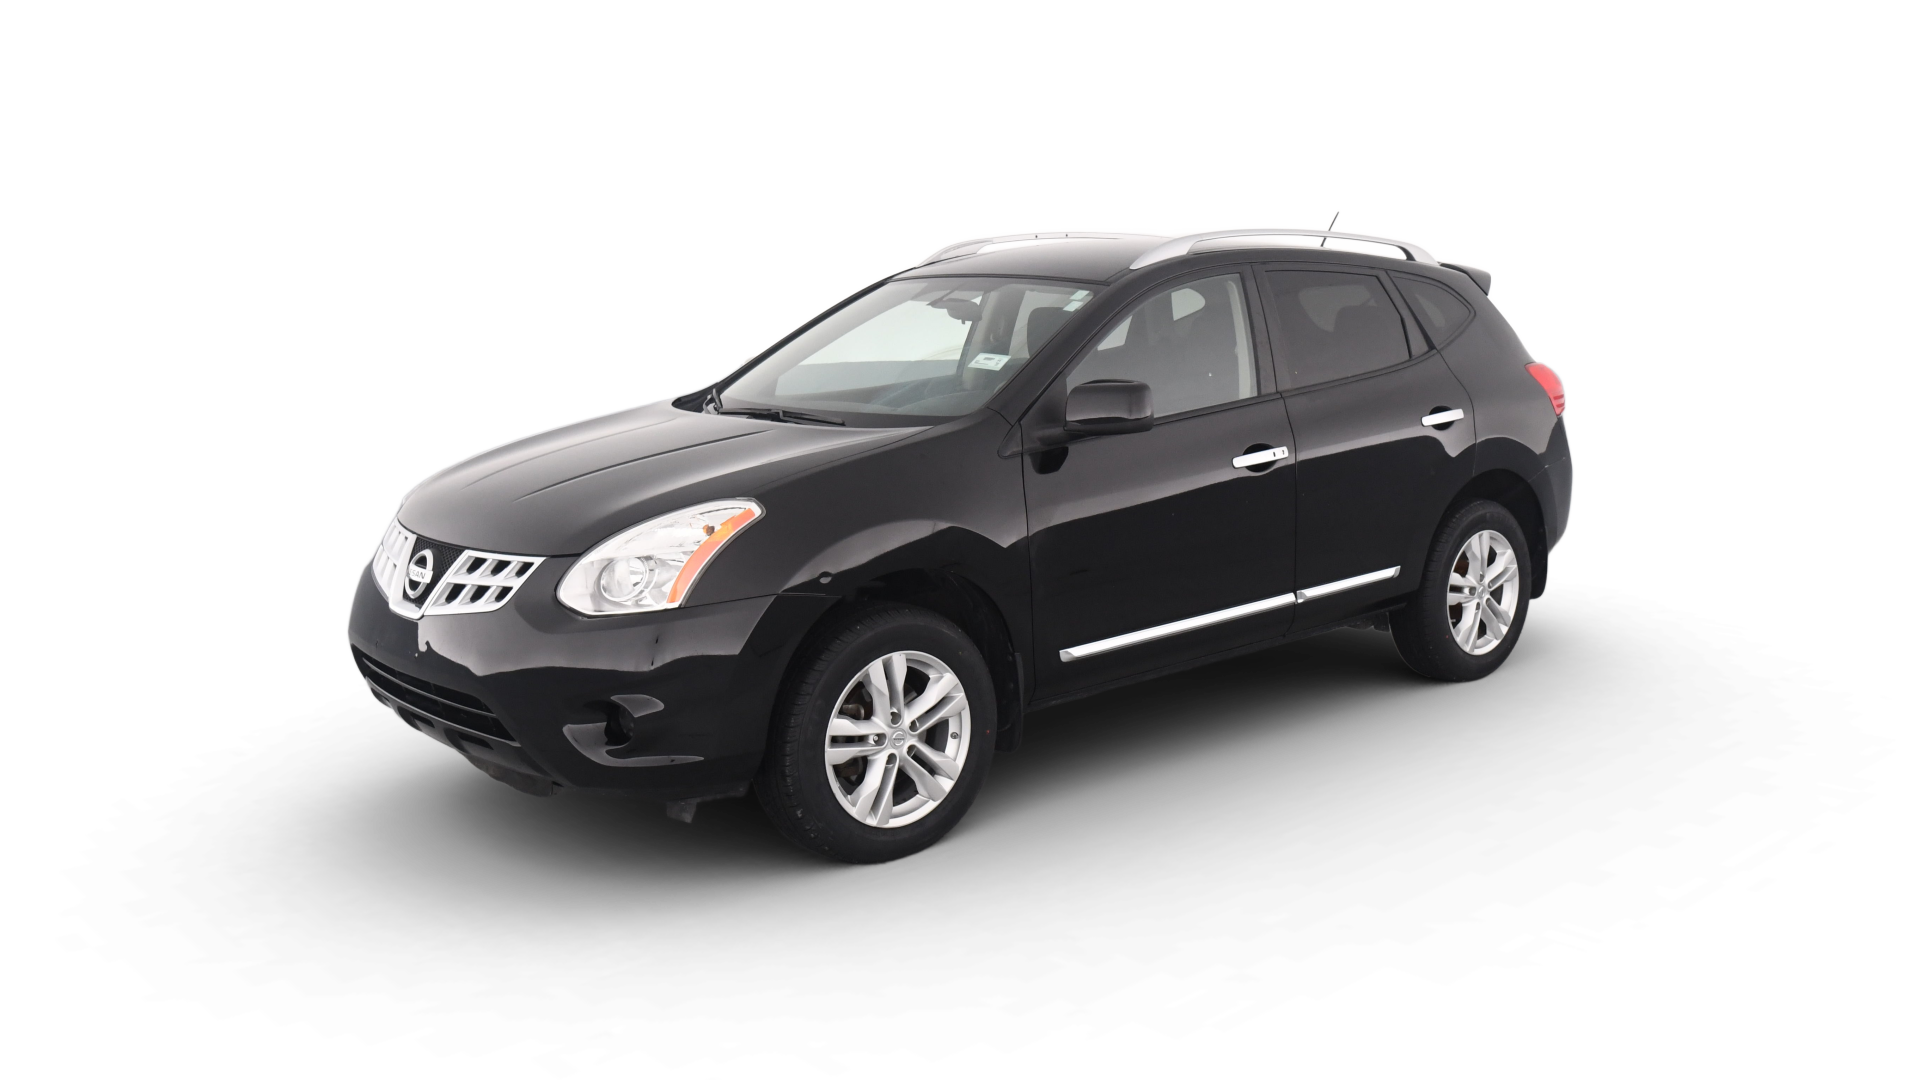 Used 2013 Nissan Rogue For Sale Online | Carvana